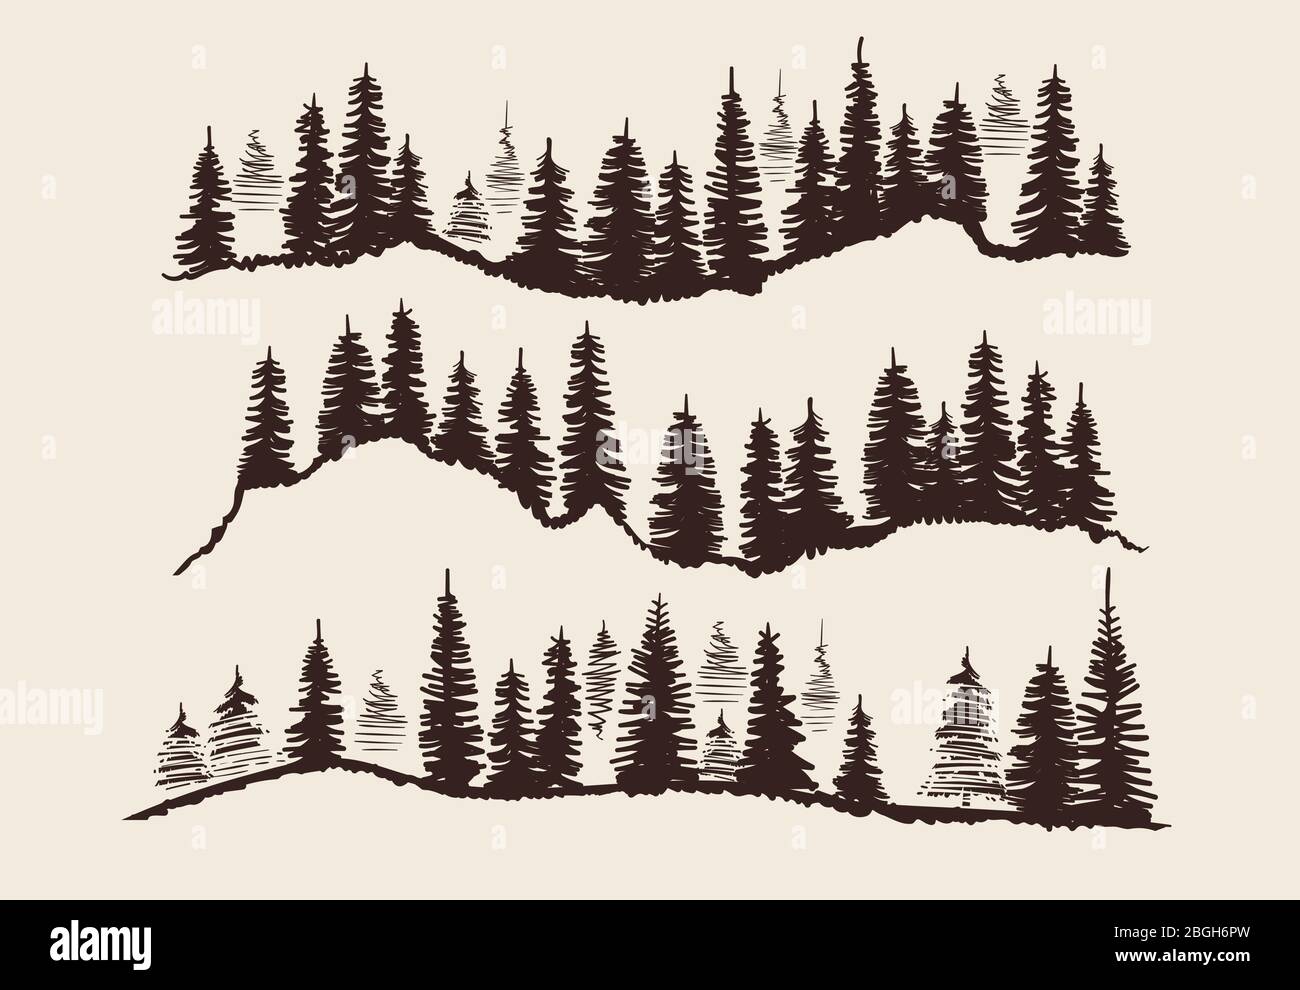 Vintage engraving forest. Doodle sketch fir-trees vector set. Illustration of fir and pine tree silhouette, forest sketch evergreen Stock Vector